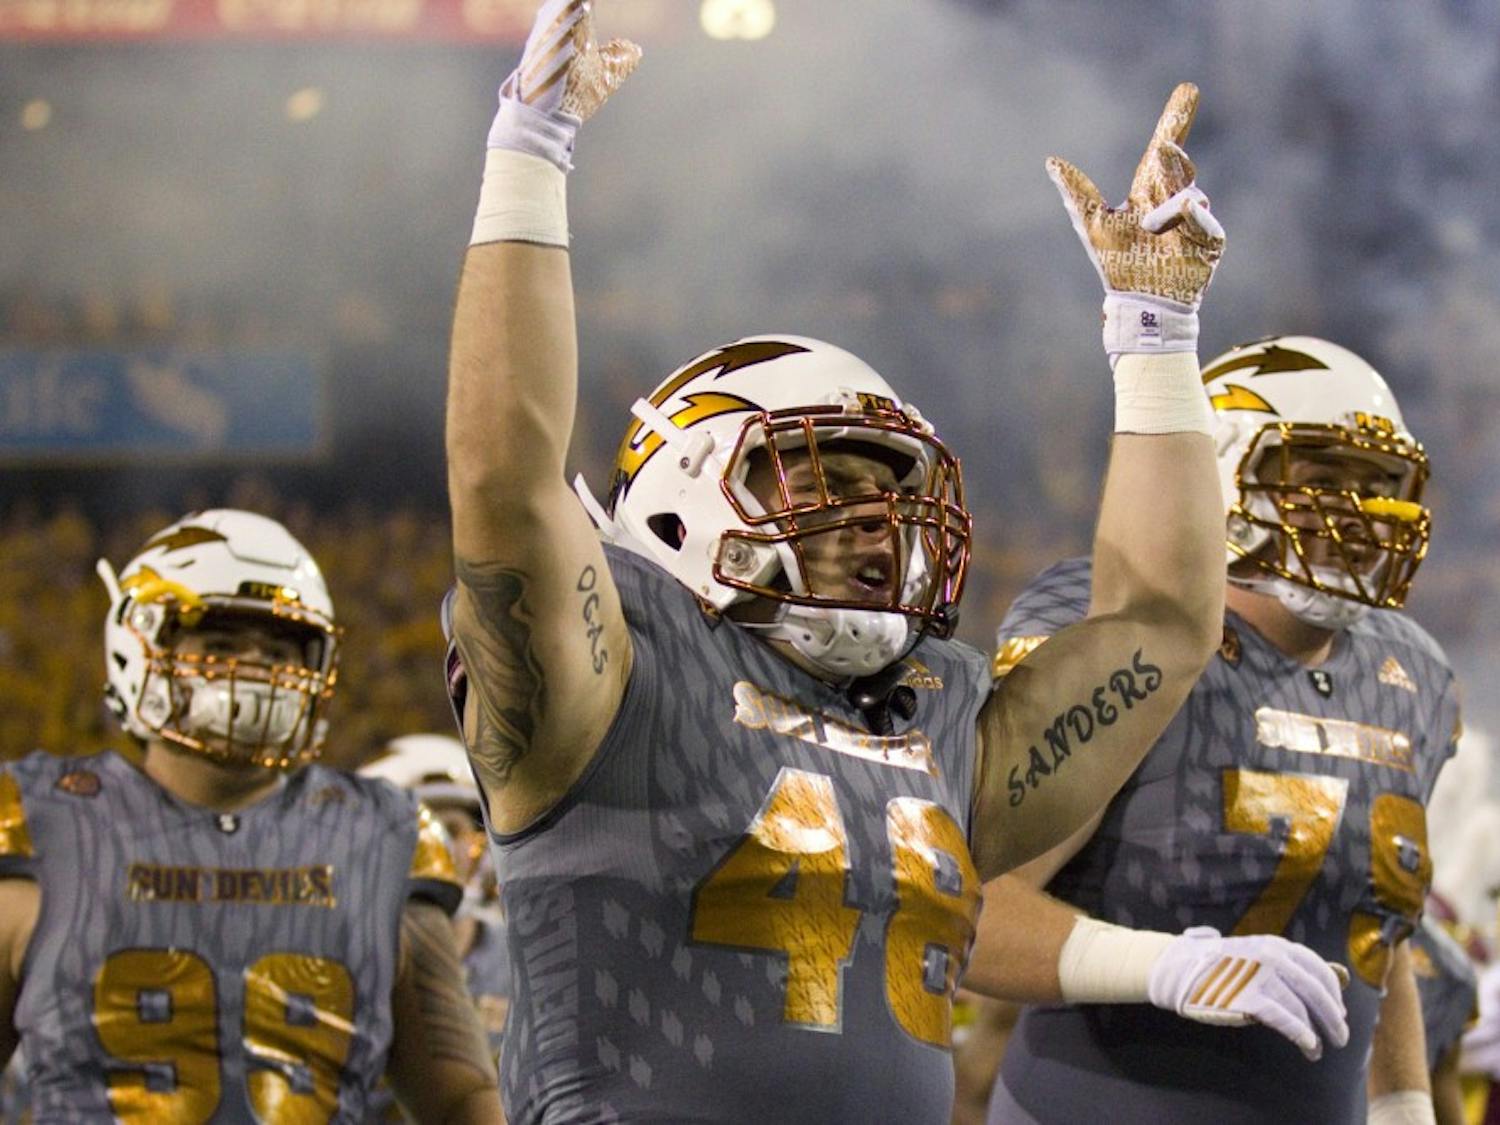 ASU linebacker Frank Ogas (48) hypes up the crowd before the game versus the UCLA Bruins in Sun Devil Stadium in Tempe, Arizona, on Saturday, Oct. 8, 2016.